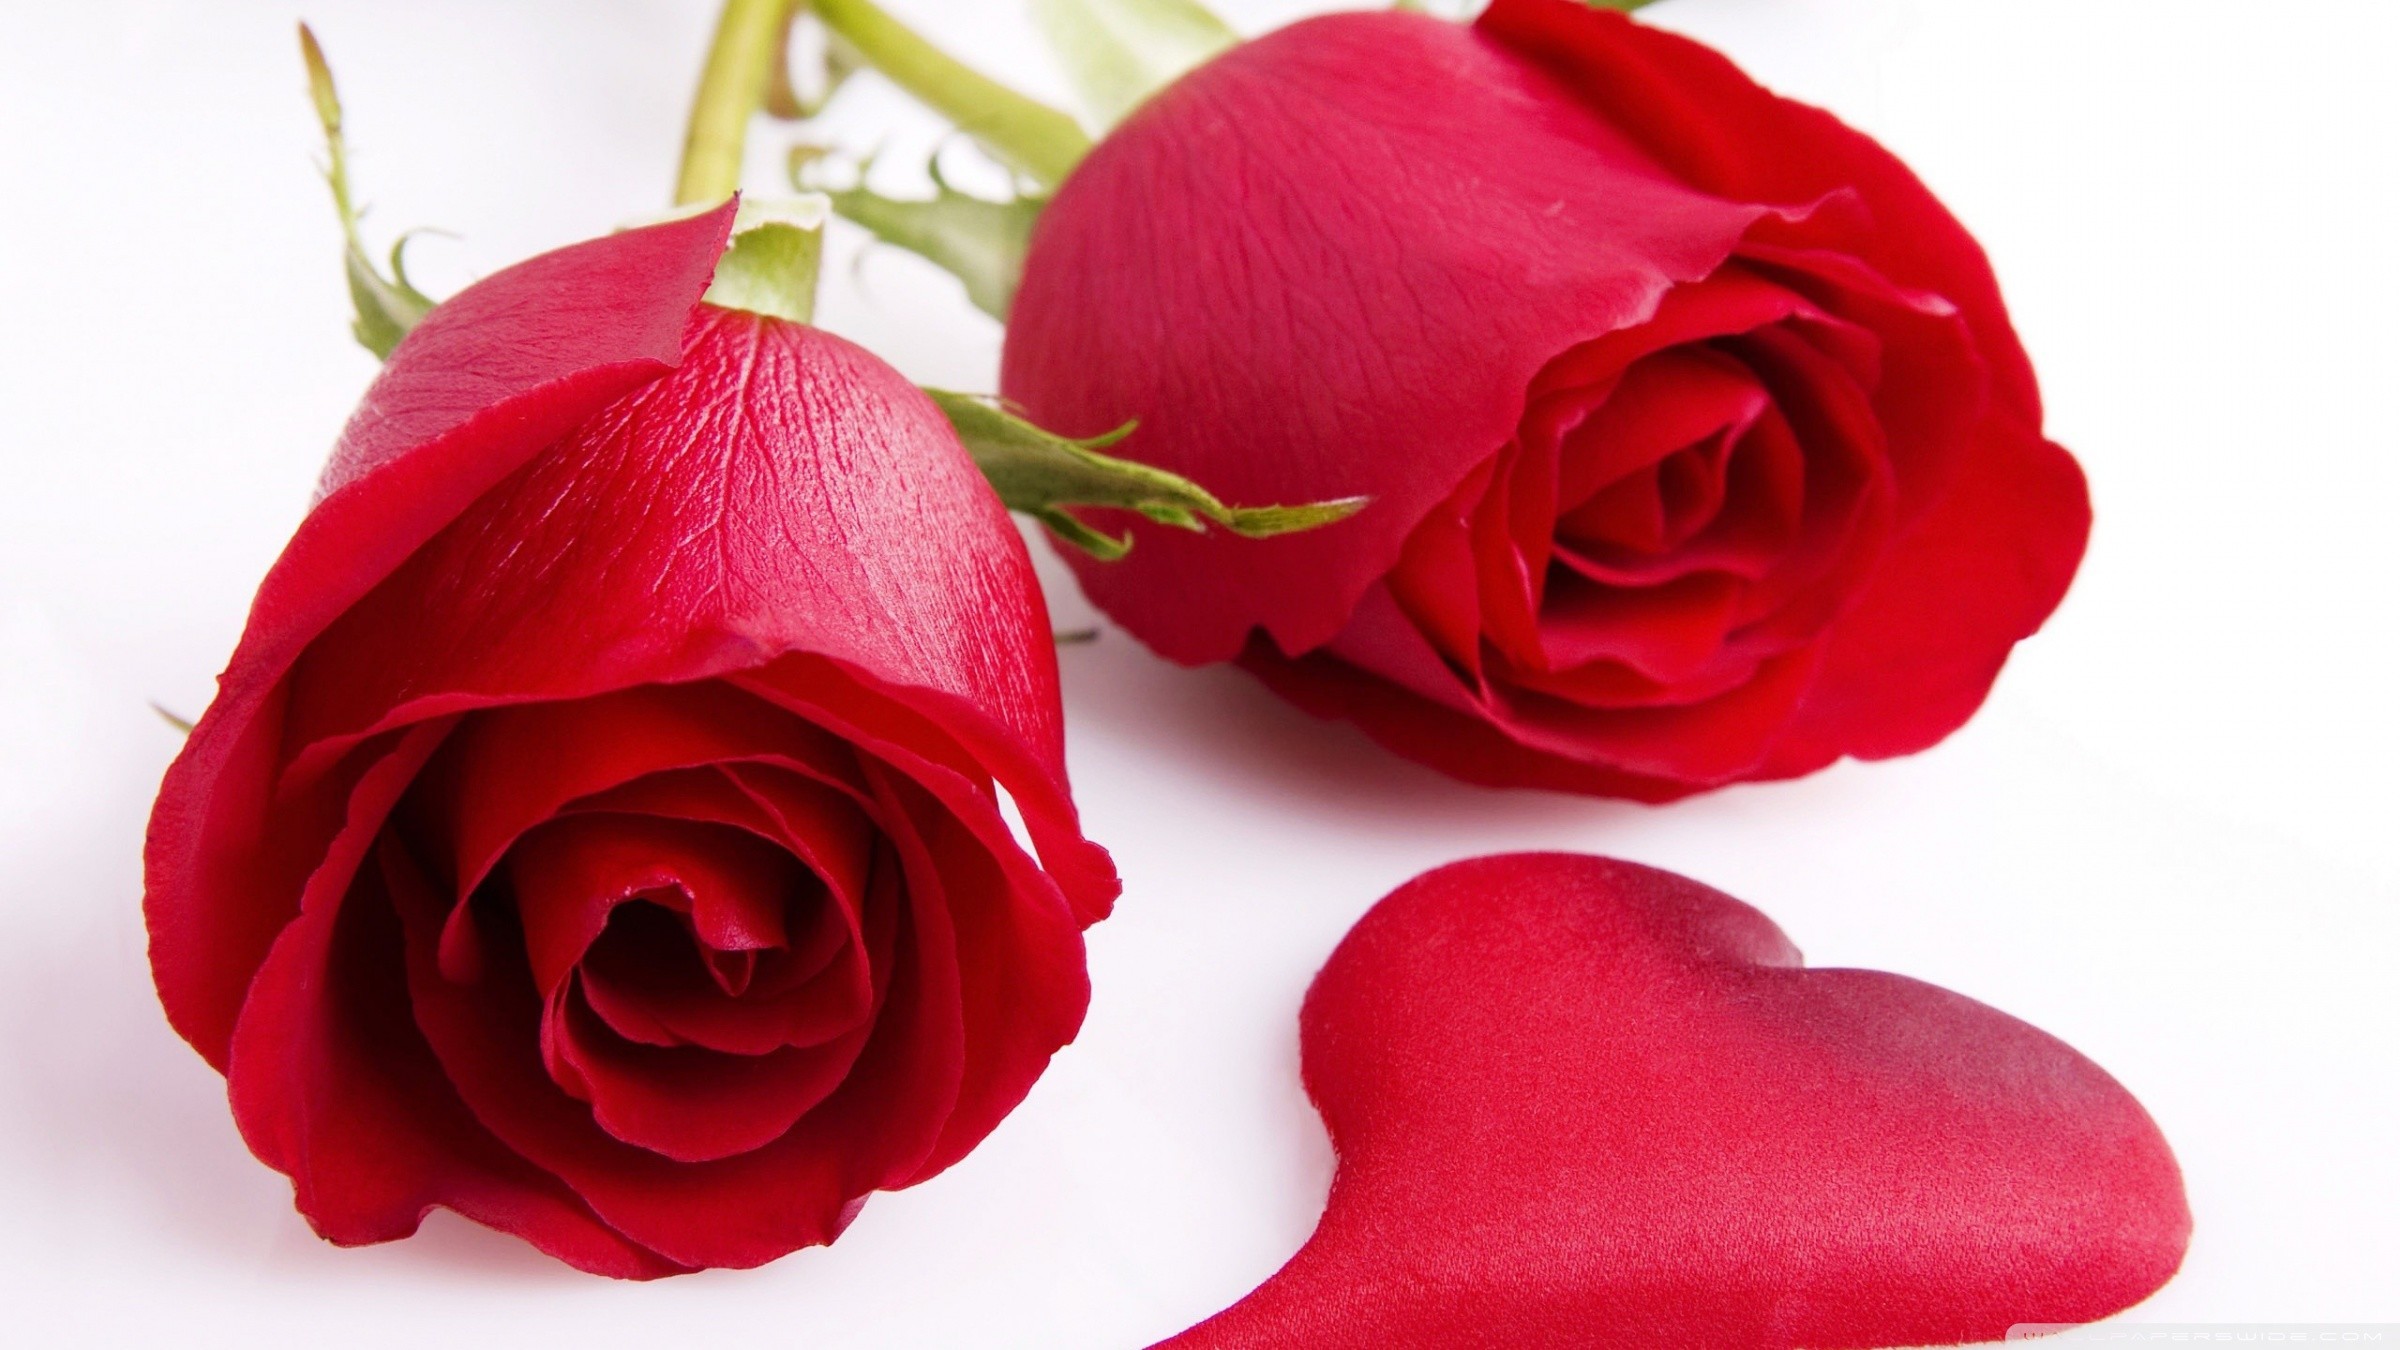 2400x1350 RED ROSE WALLPAPER WITH WHITE BACKGROUND âº. Roses Wallpaper for Desktop